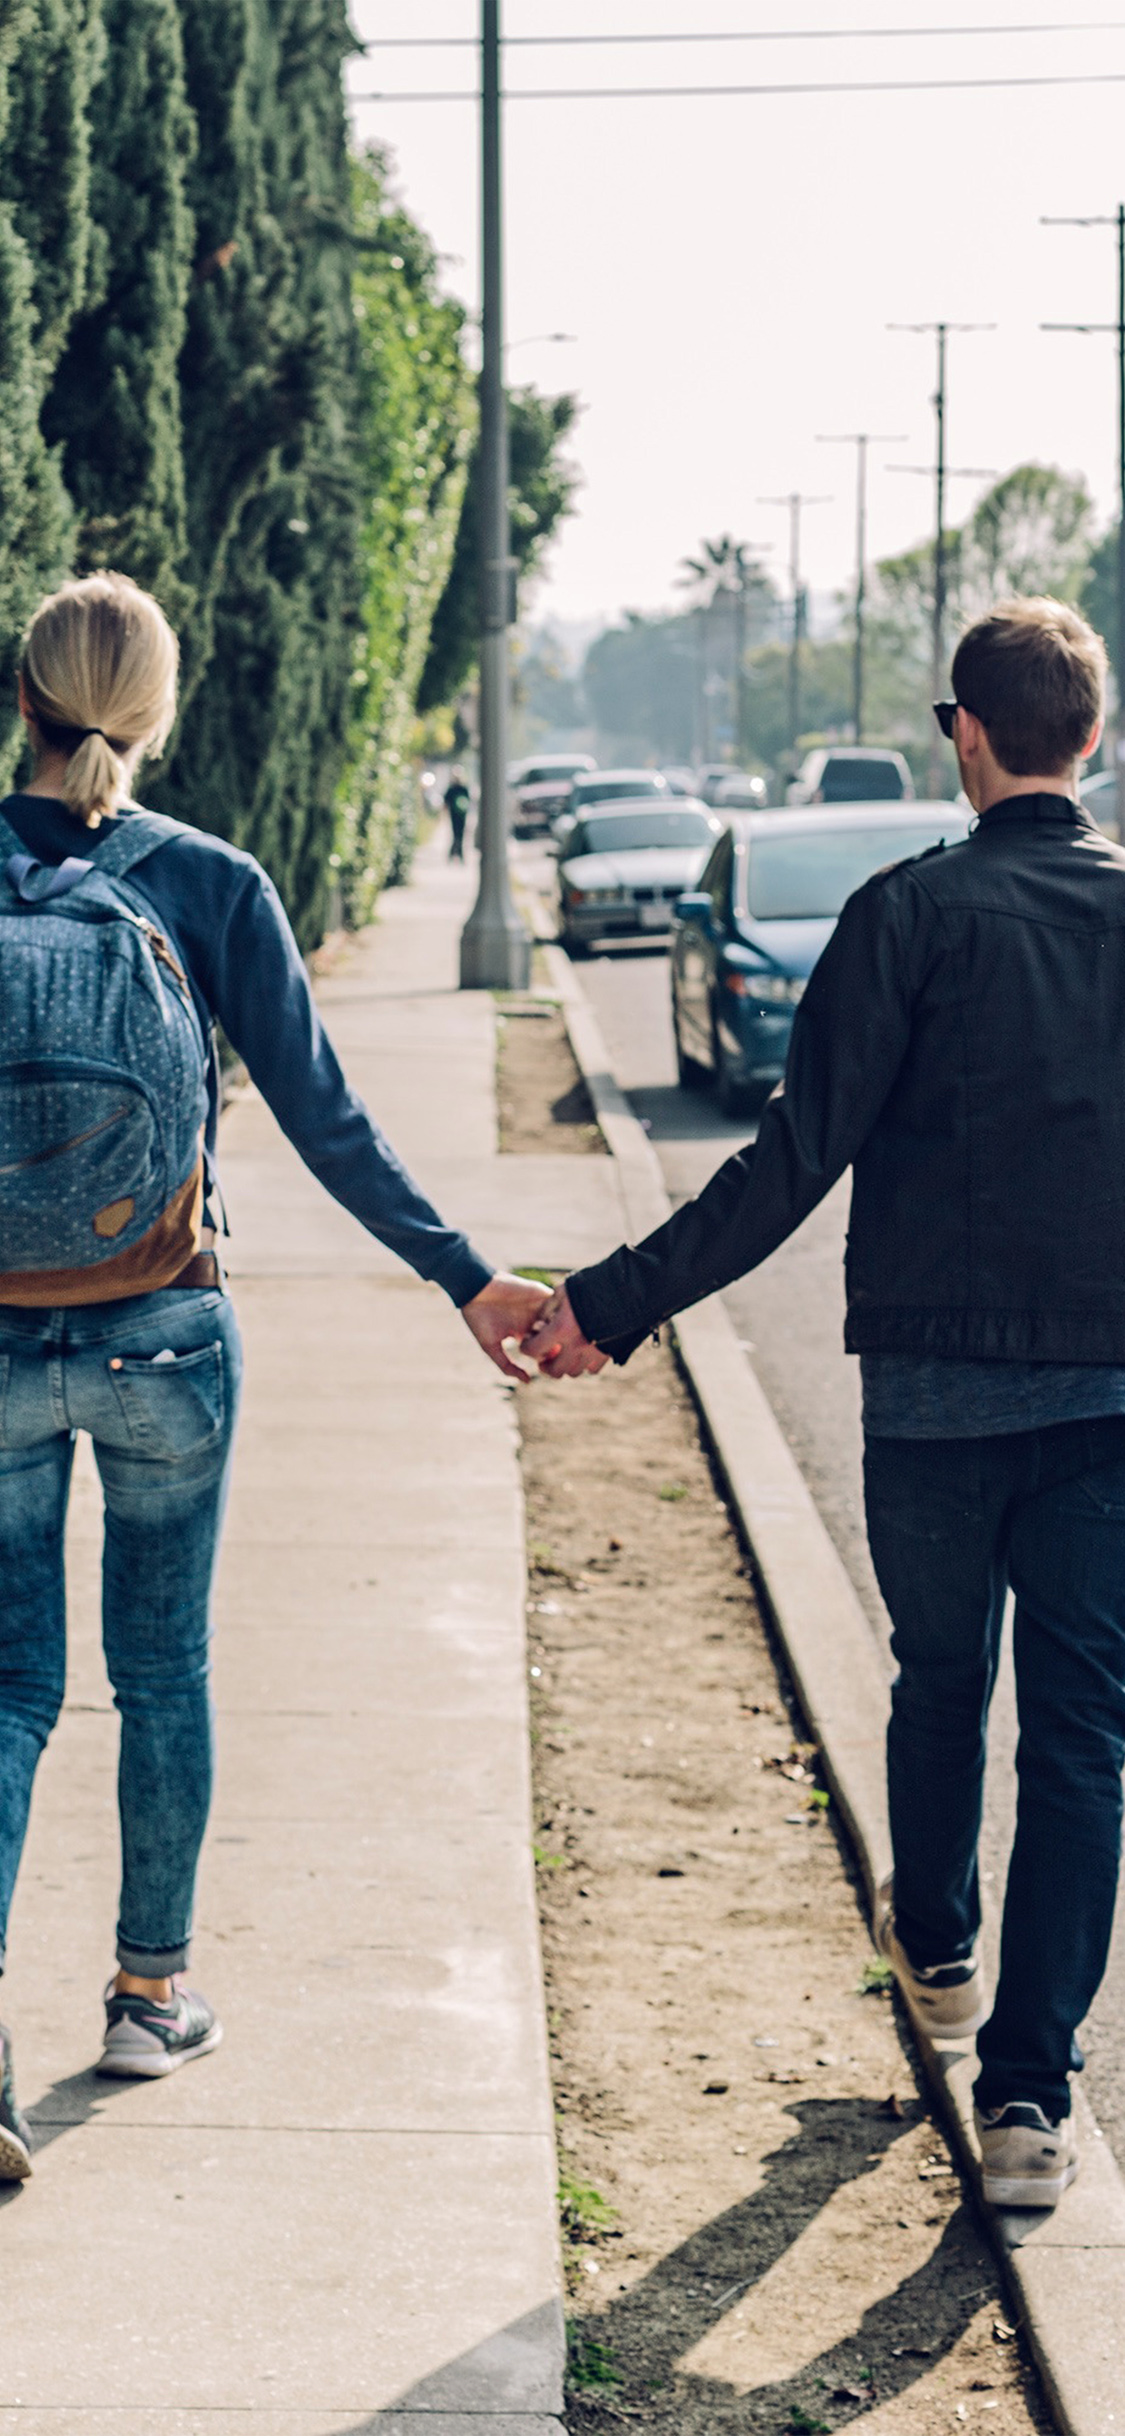 love couple wallpaper,jeans,walking,standing,interaction,holding hands